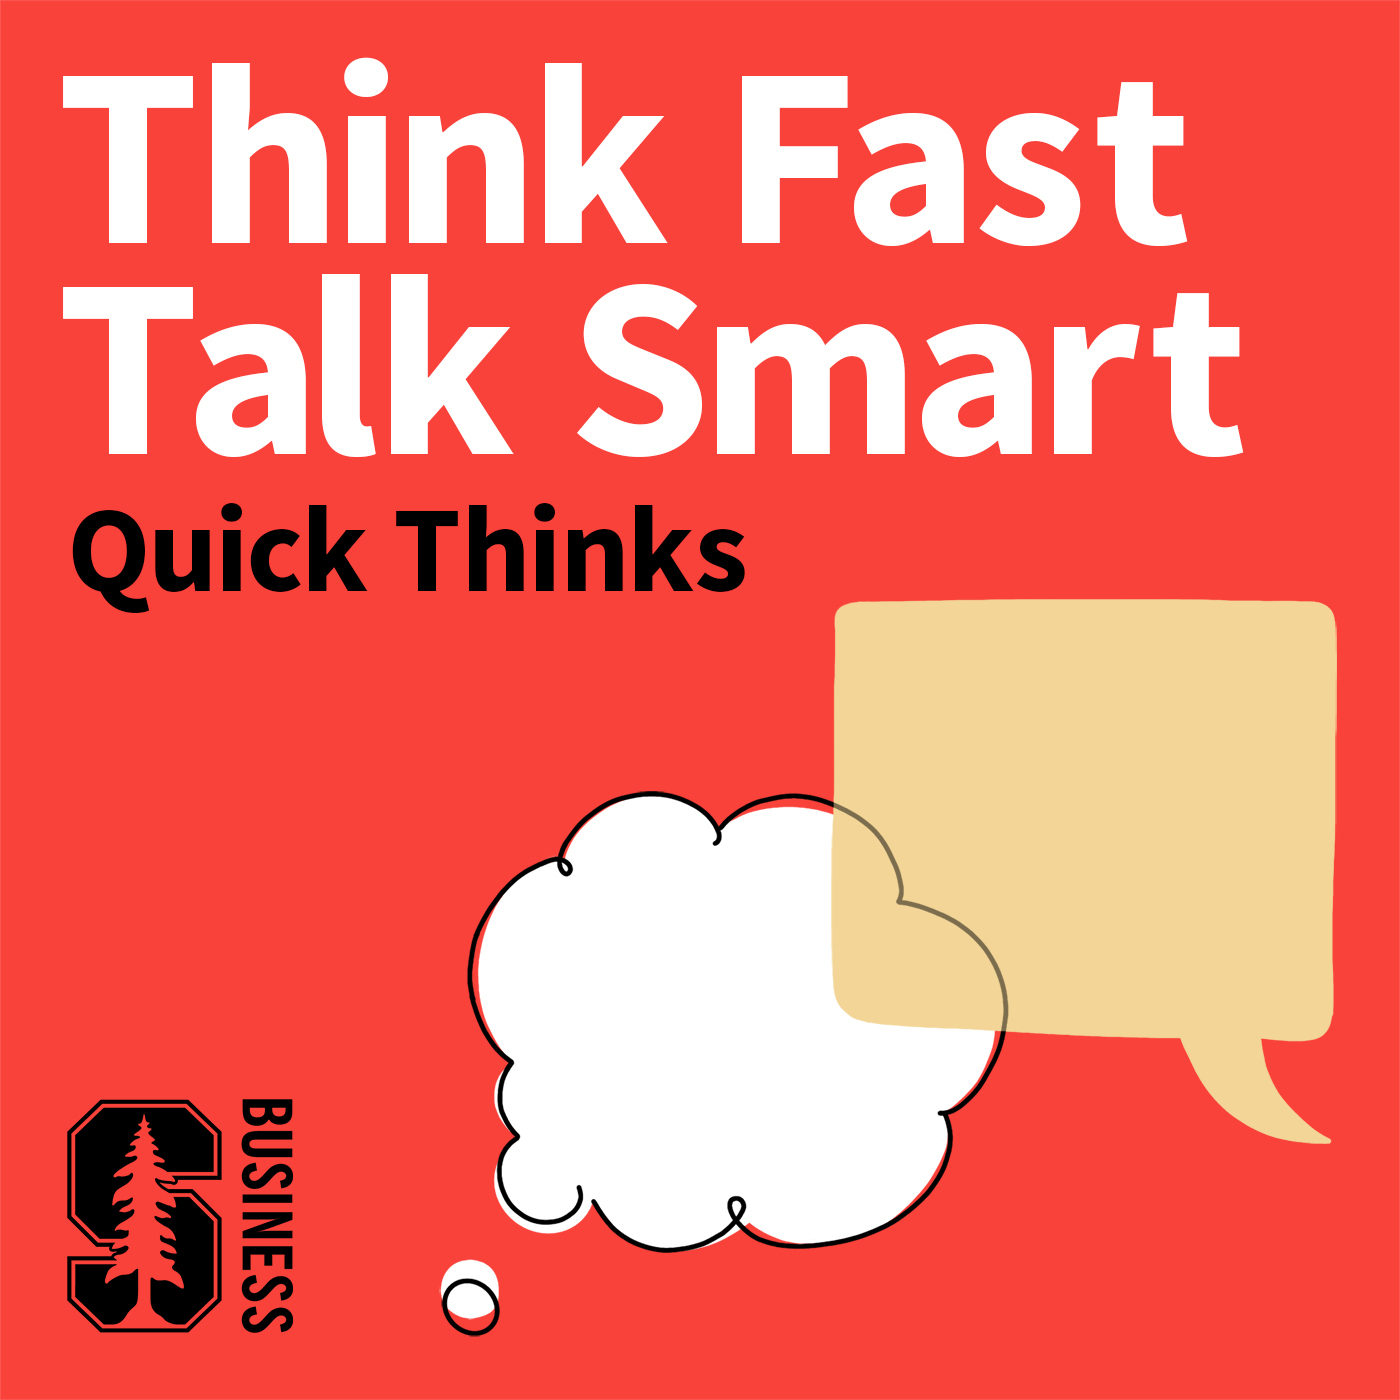 9. Quick Think: How Being Present-Oriented Improves Communication by Stanford GSB